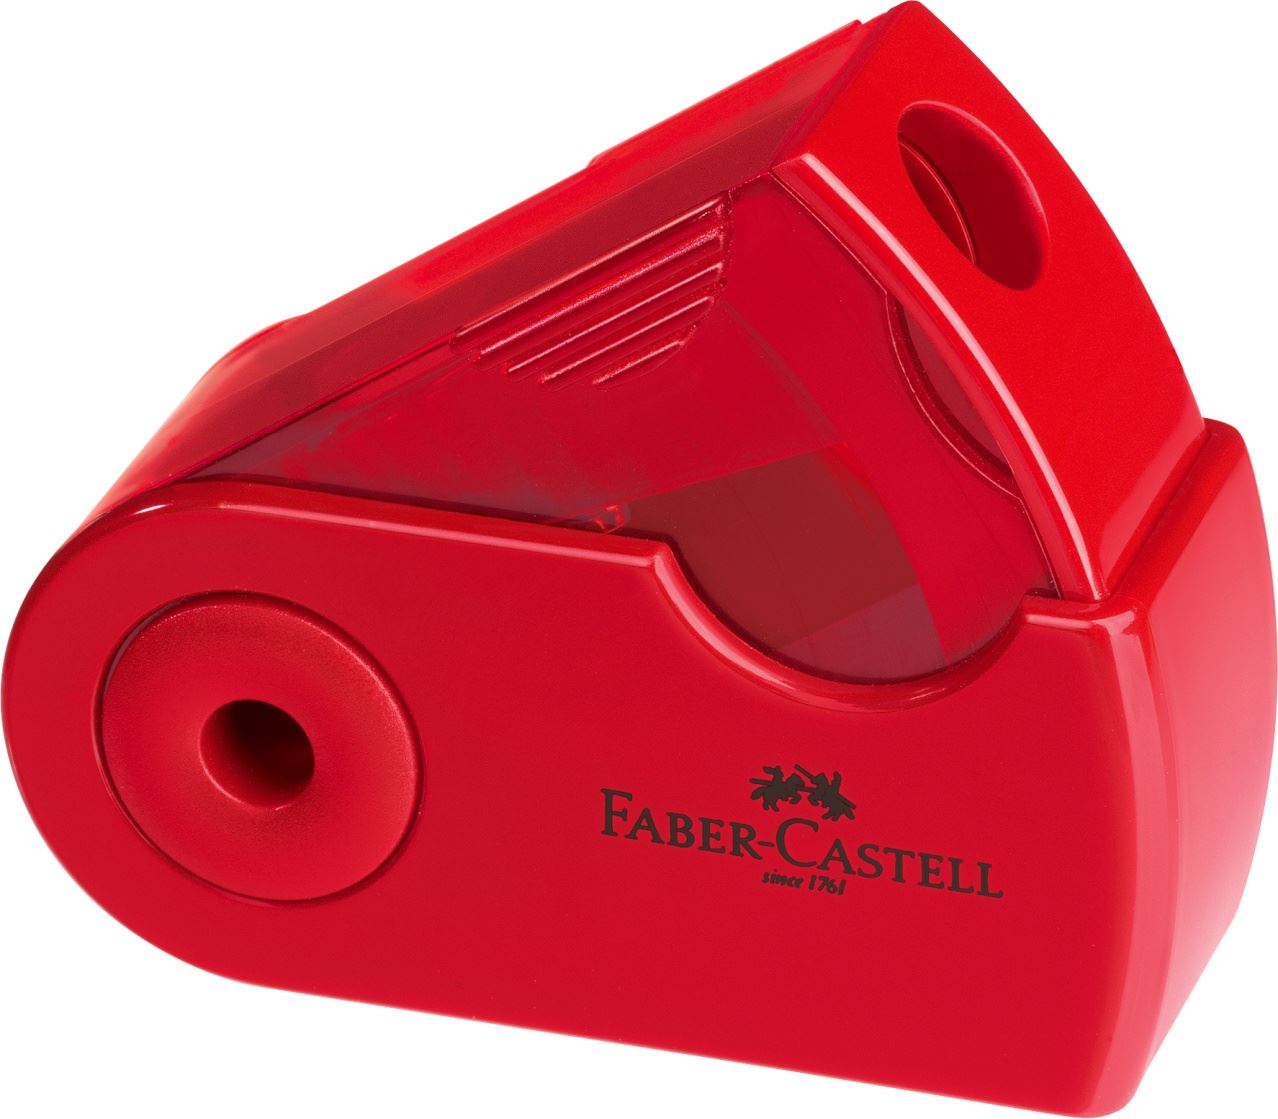 Faber-Castell - Taille-crayon 1 usage Sleeve Mini rouge/bleu